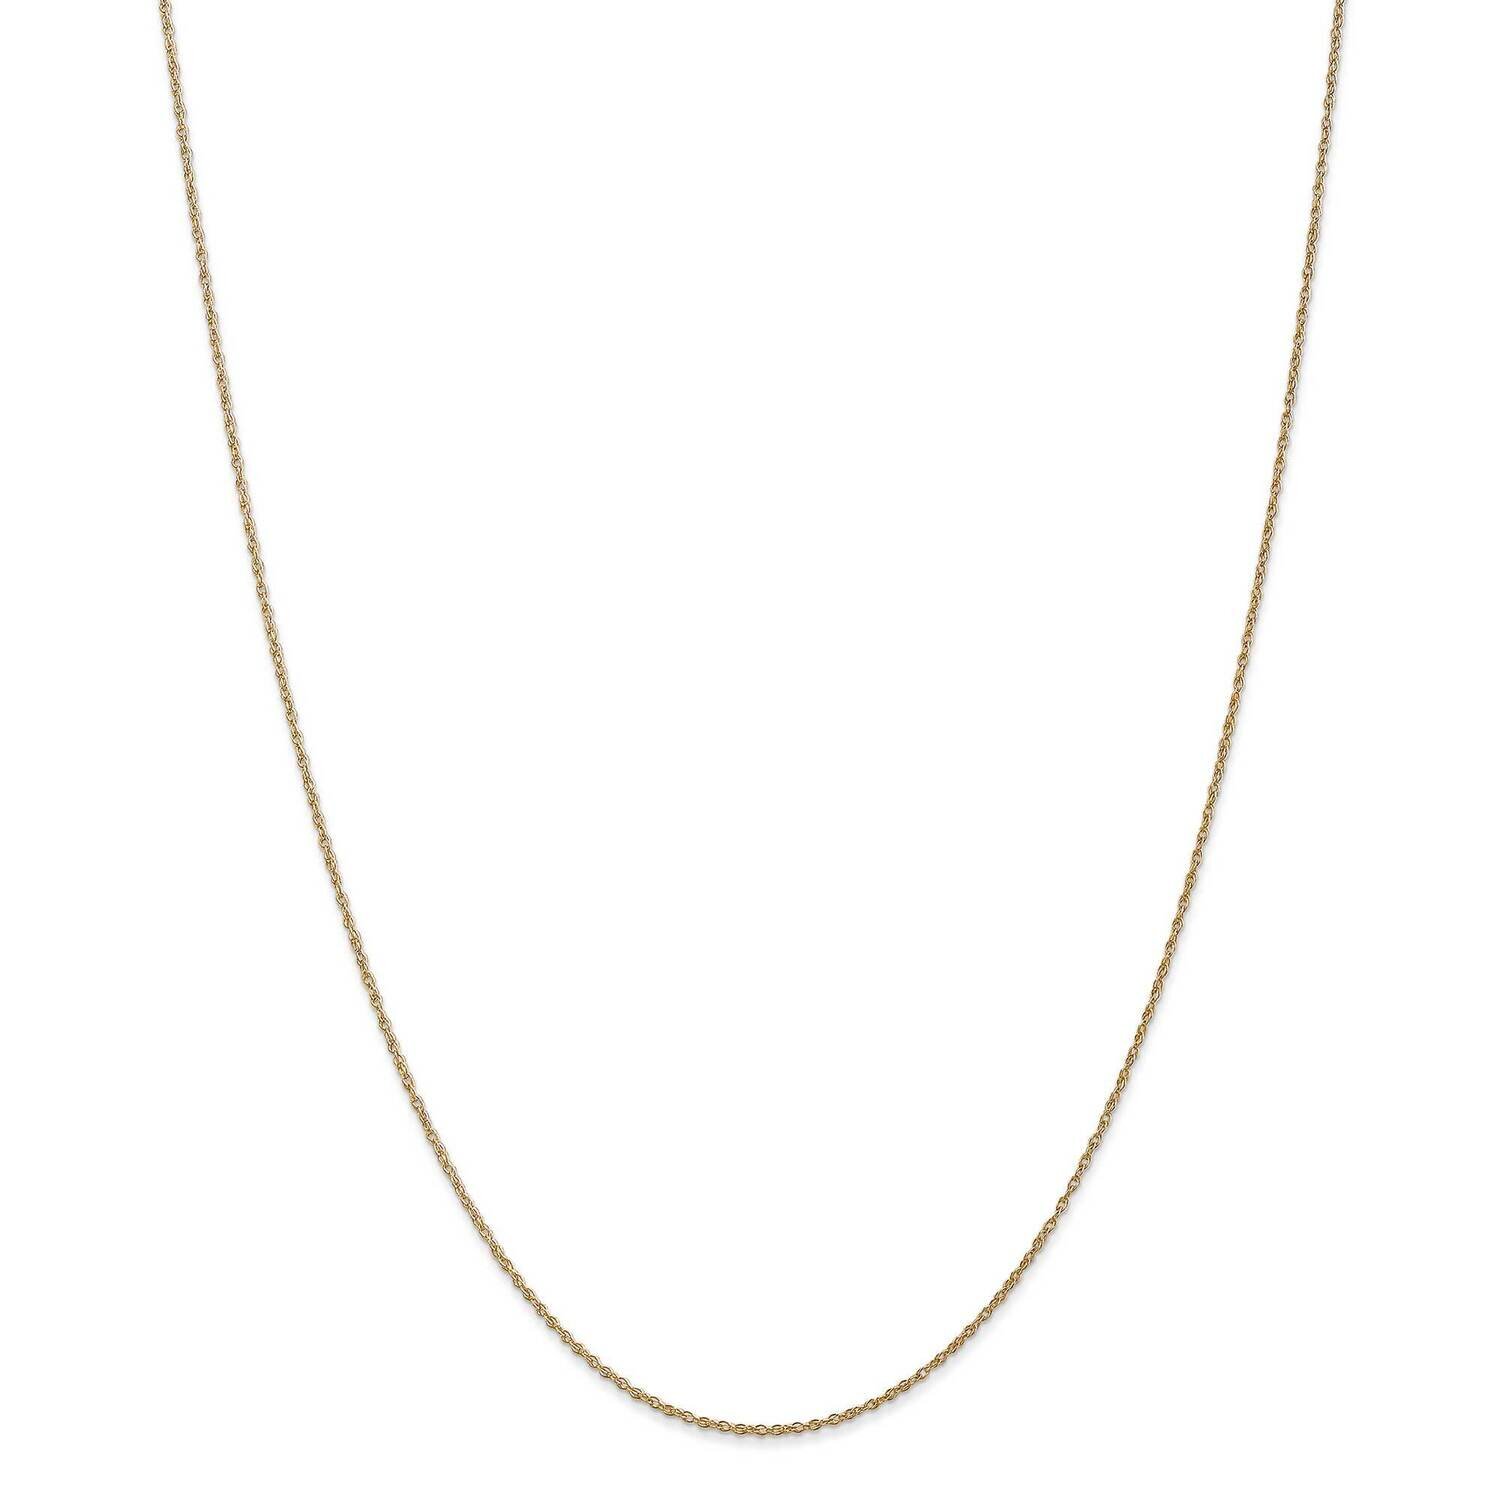 .8mm Light-Baby Rope Chain 22 Inch 14k Gold PEN3-22